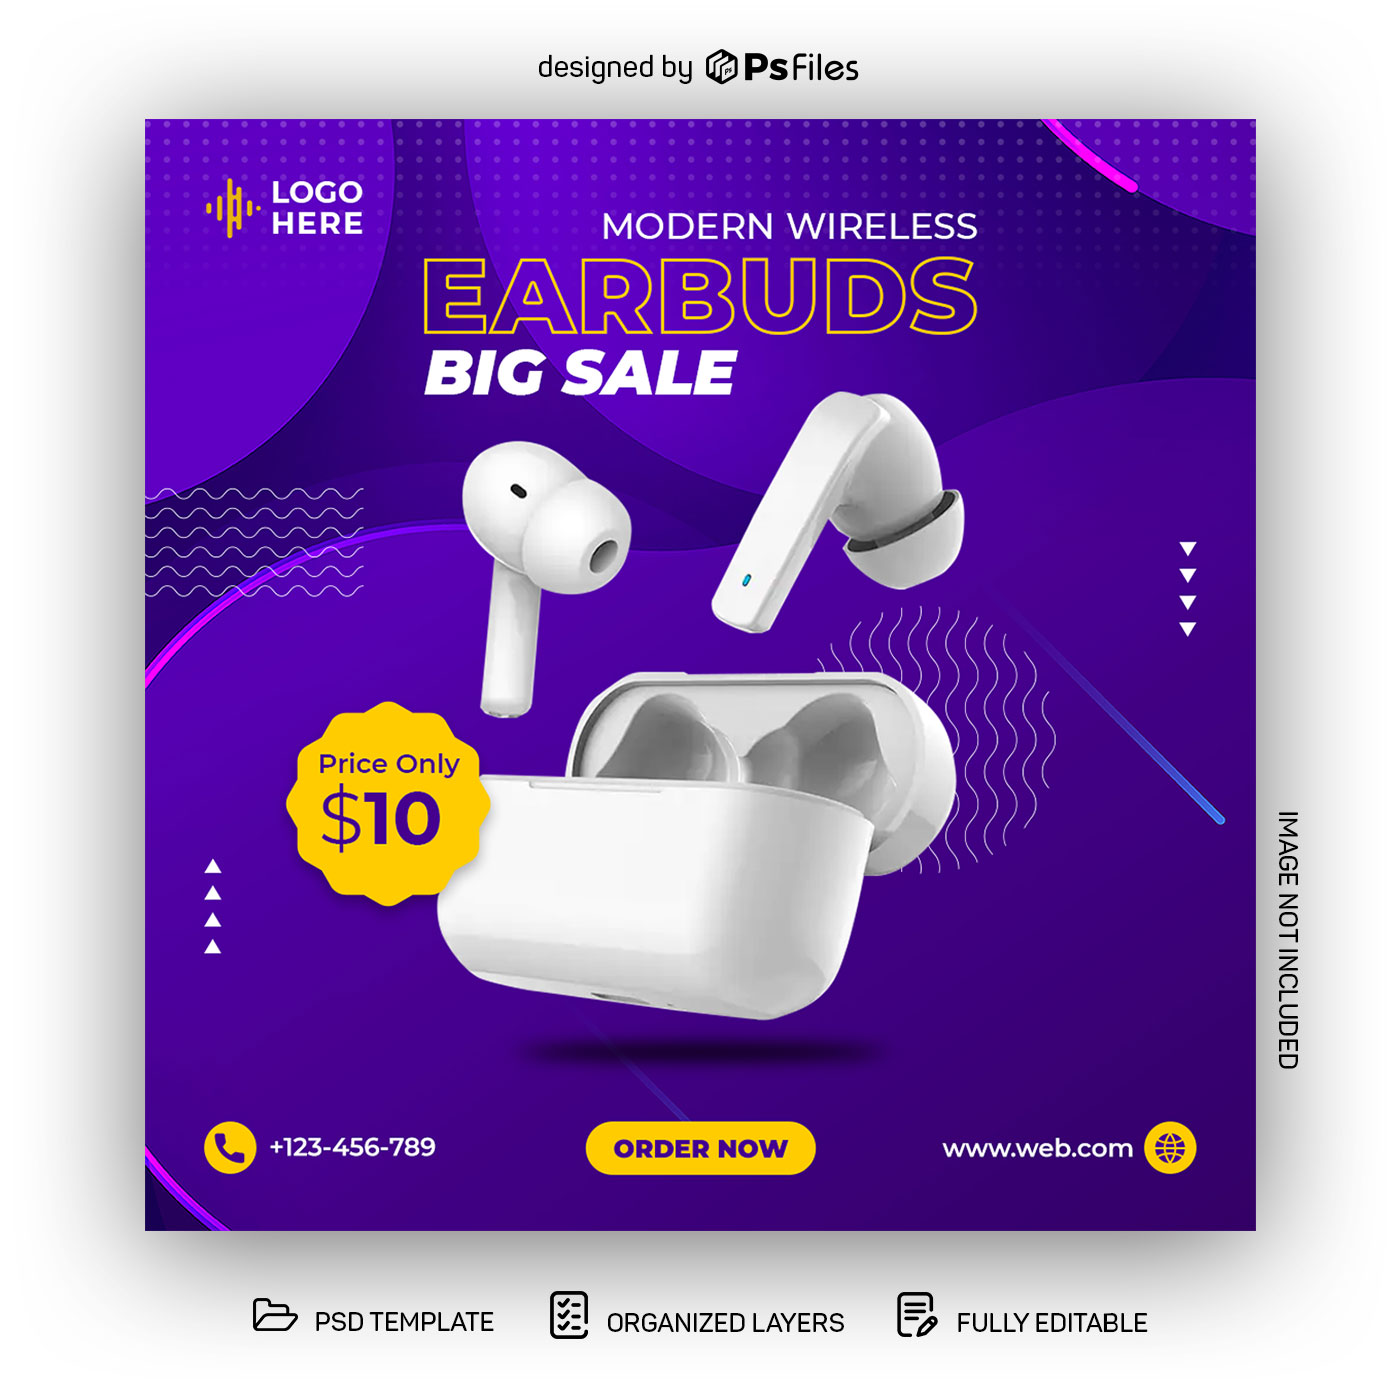 Purple Color Creative Earbuds Big Sale Offer Social Media Post Design PSD Template for Free 